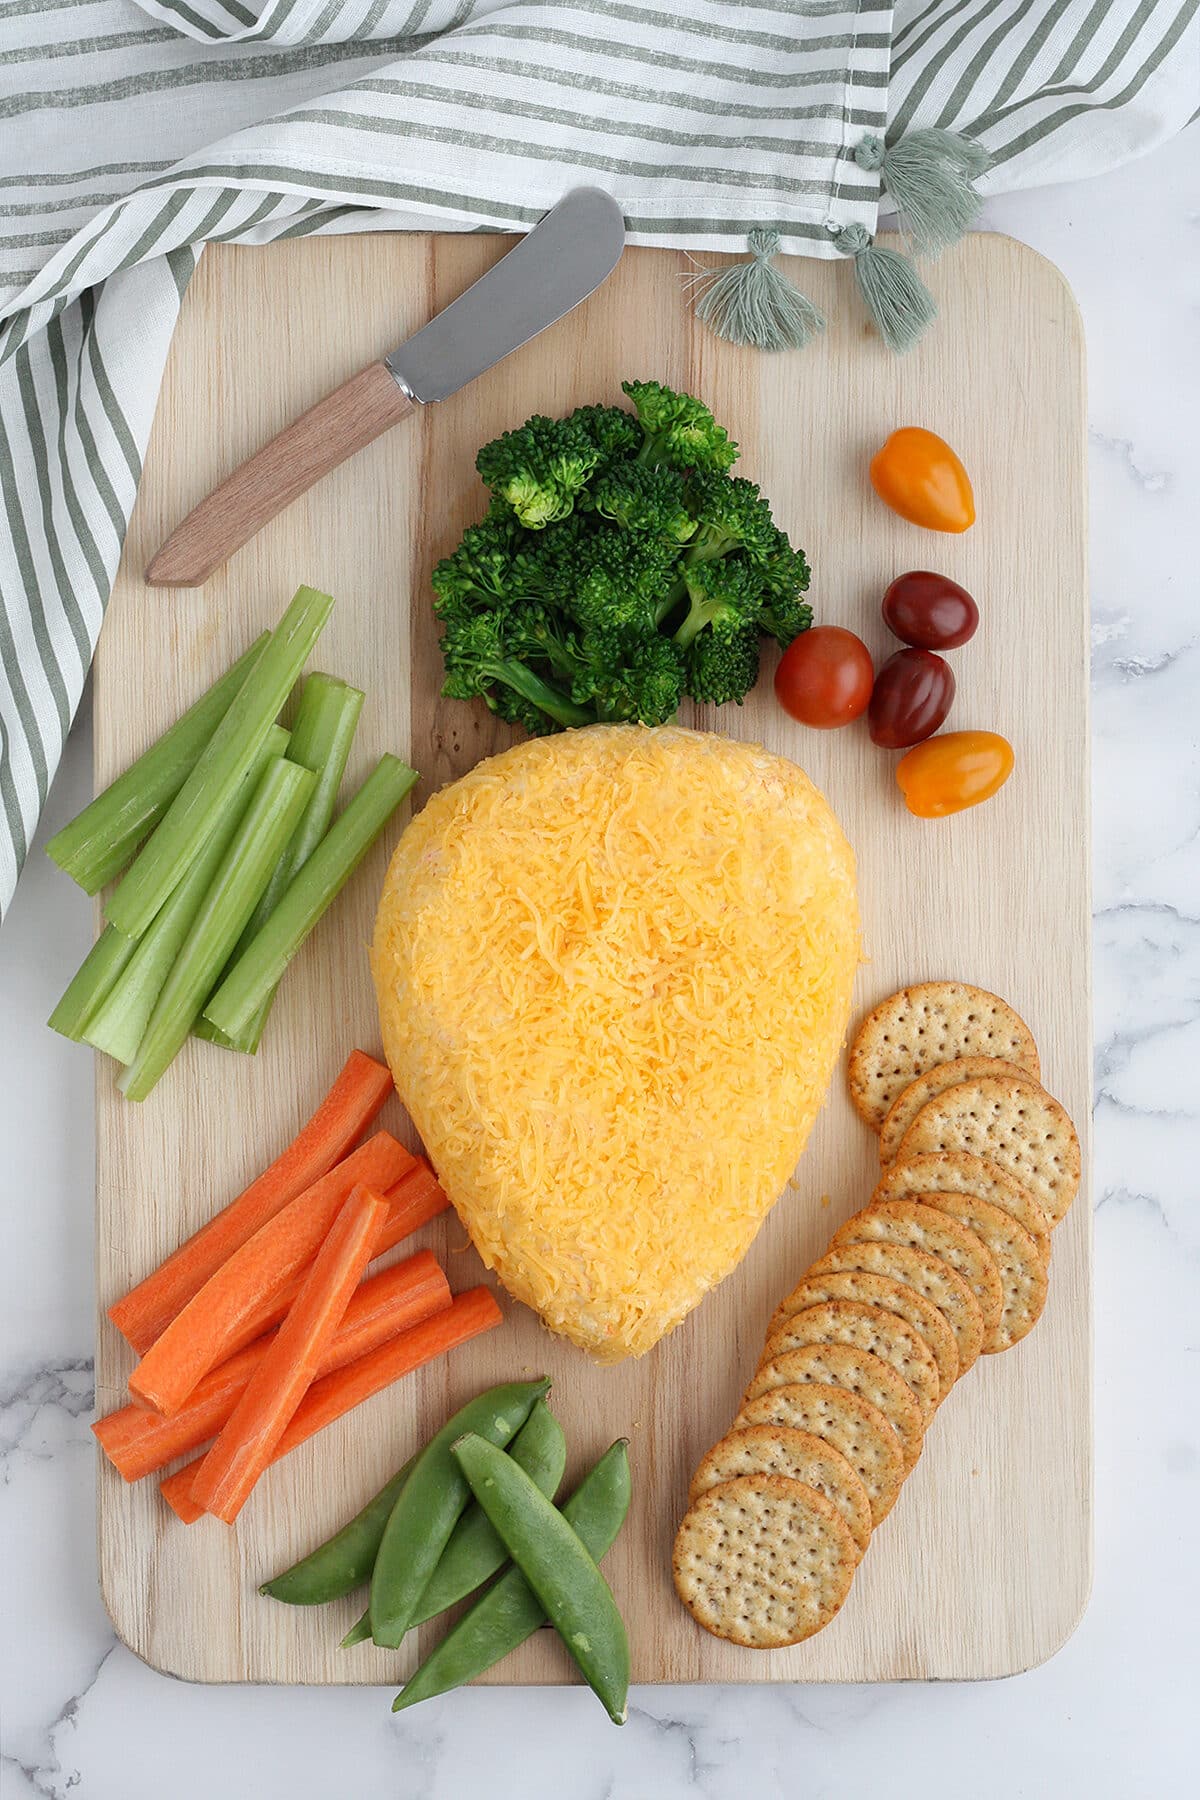 Carrot-shaped cheese ball with crackers and vegetables